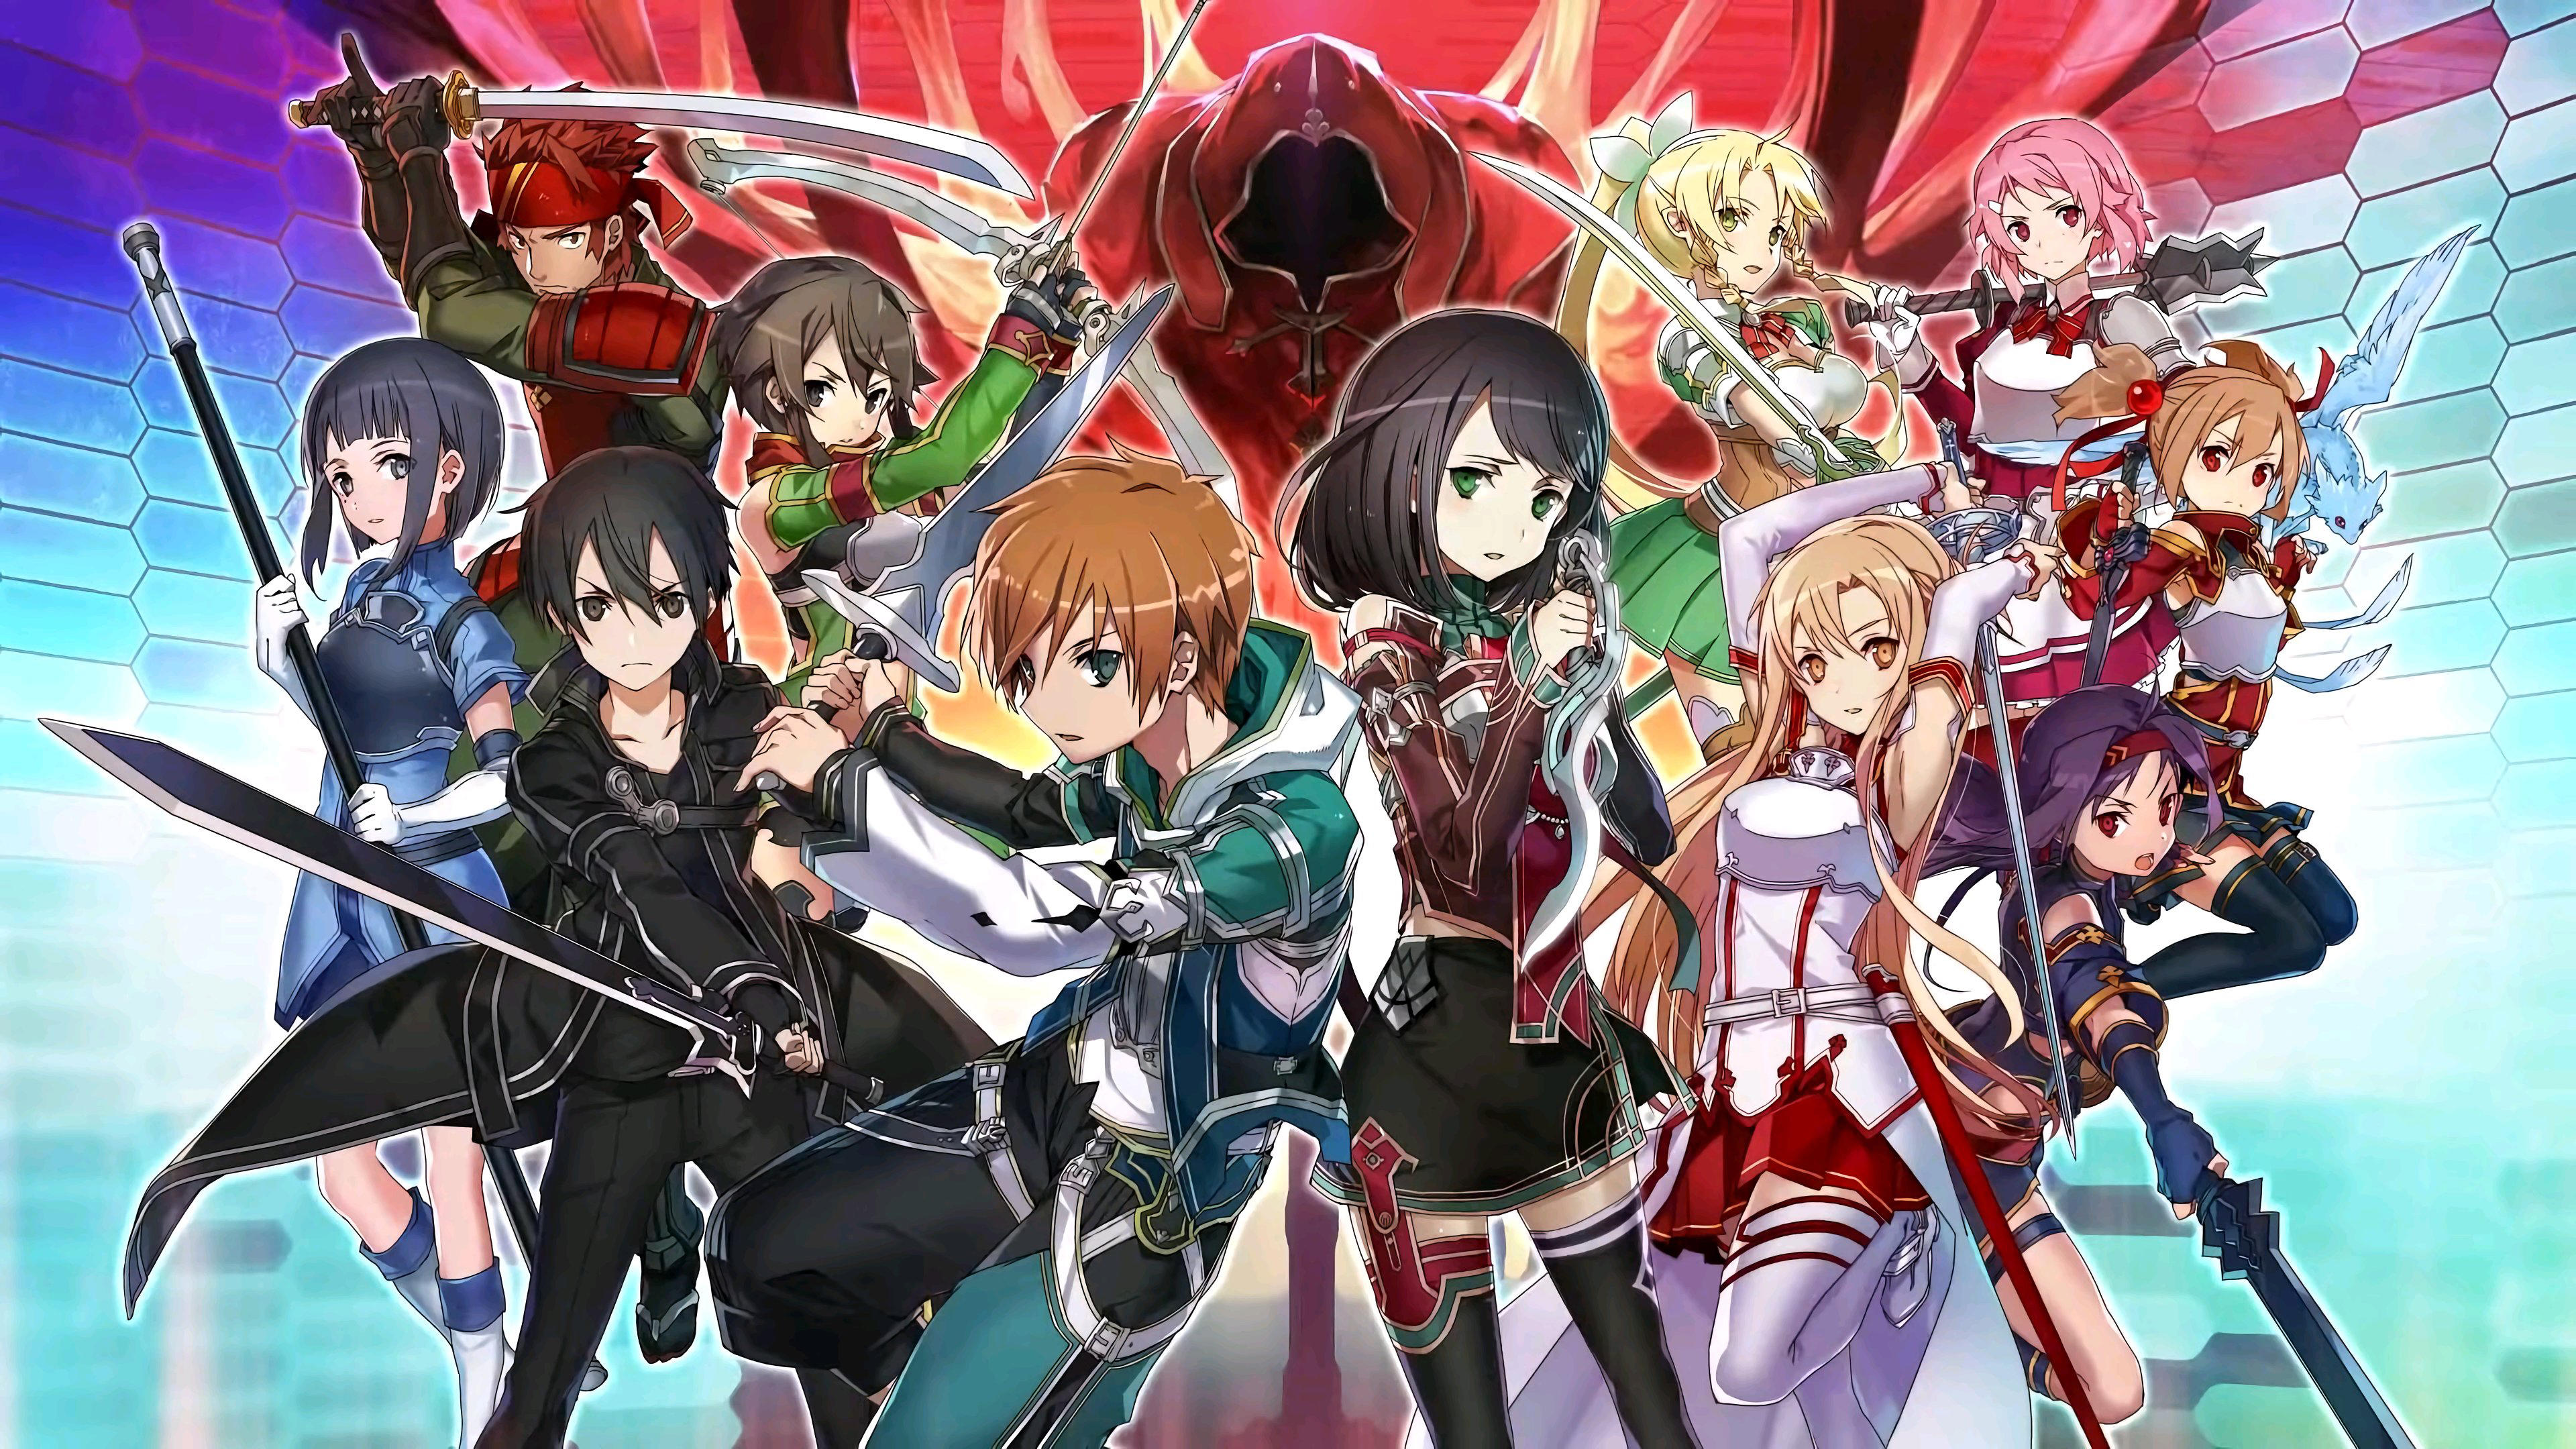 Sword Art Online: Integral Factor English Gameplay Android / iOS (Open  World MMORPG) 